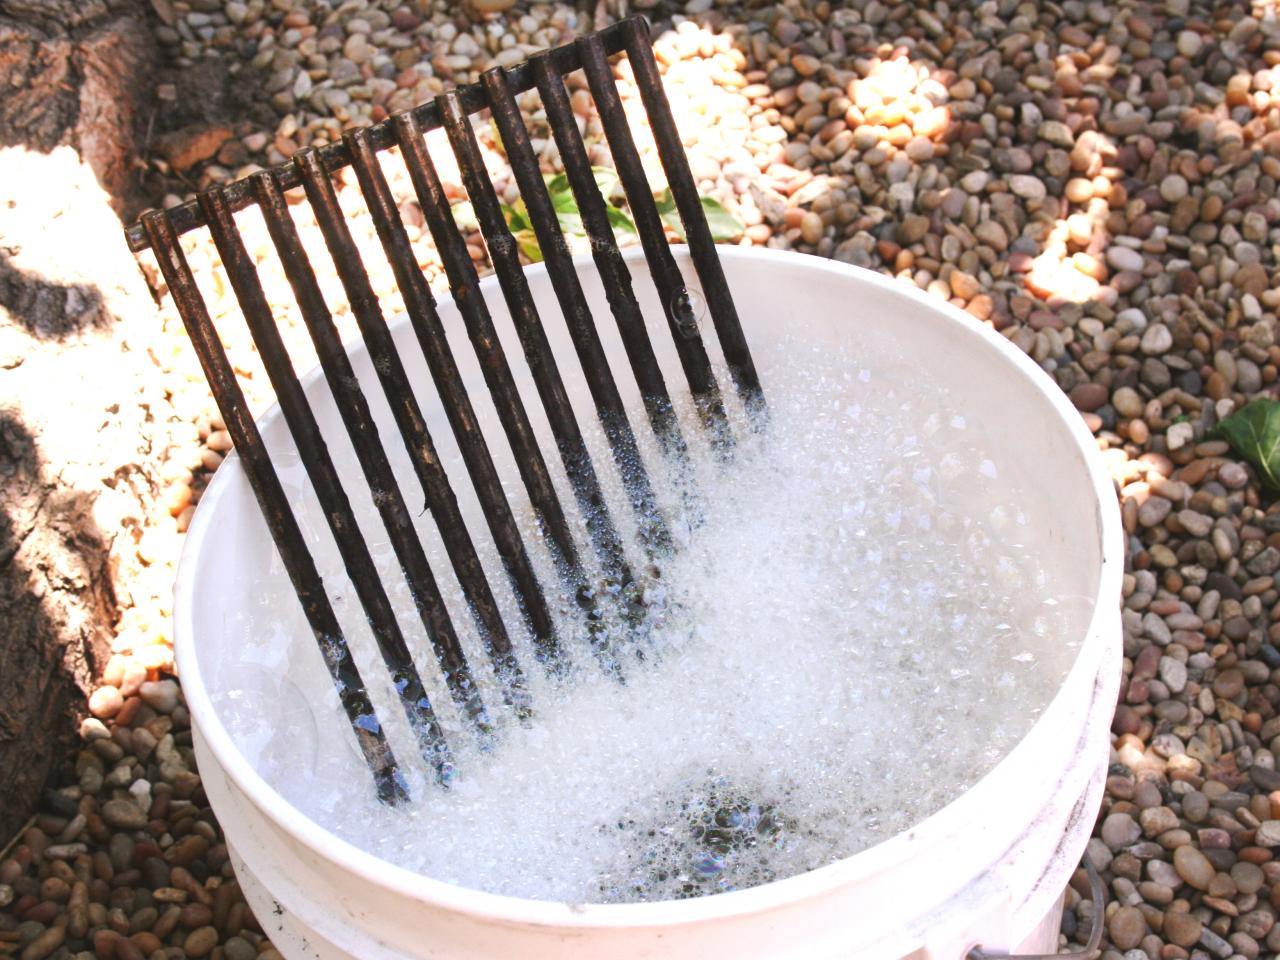 How to Clean a Barbeque Grill in 5 Minutes  how-tos  DIY